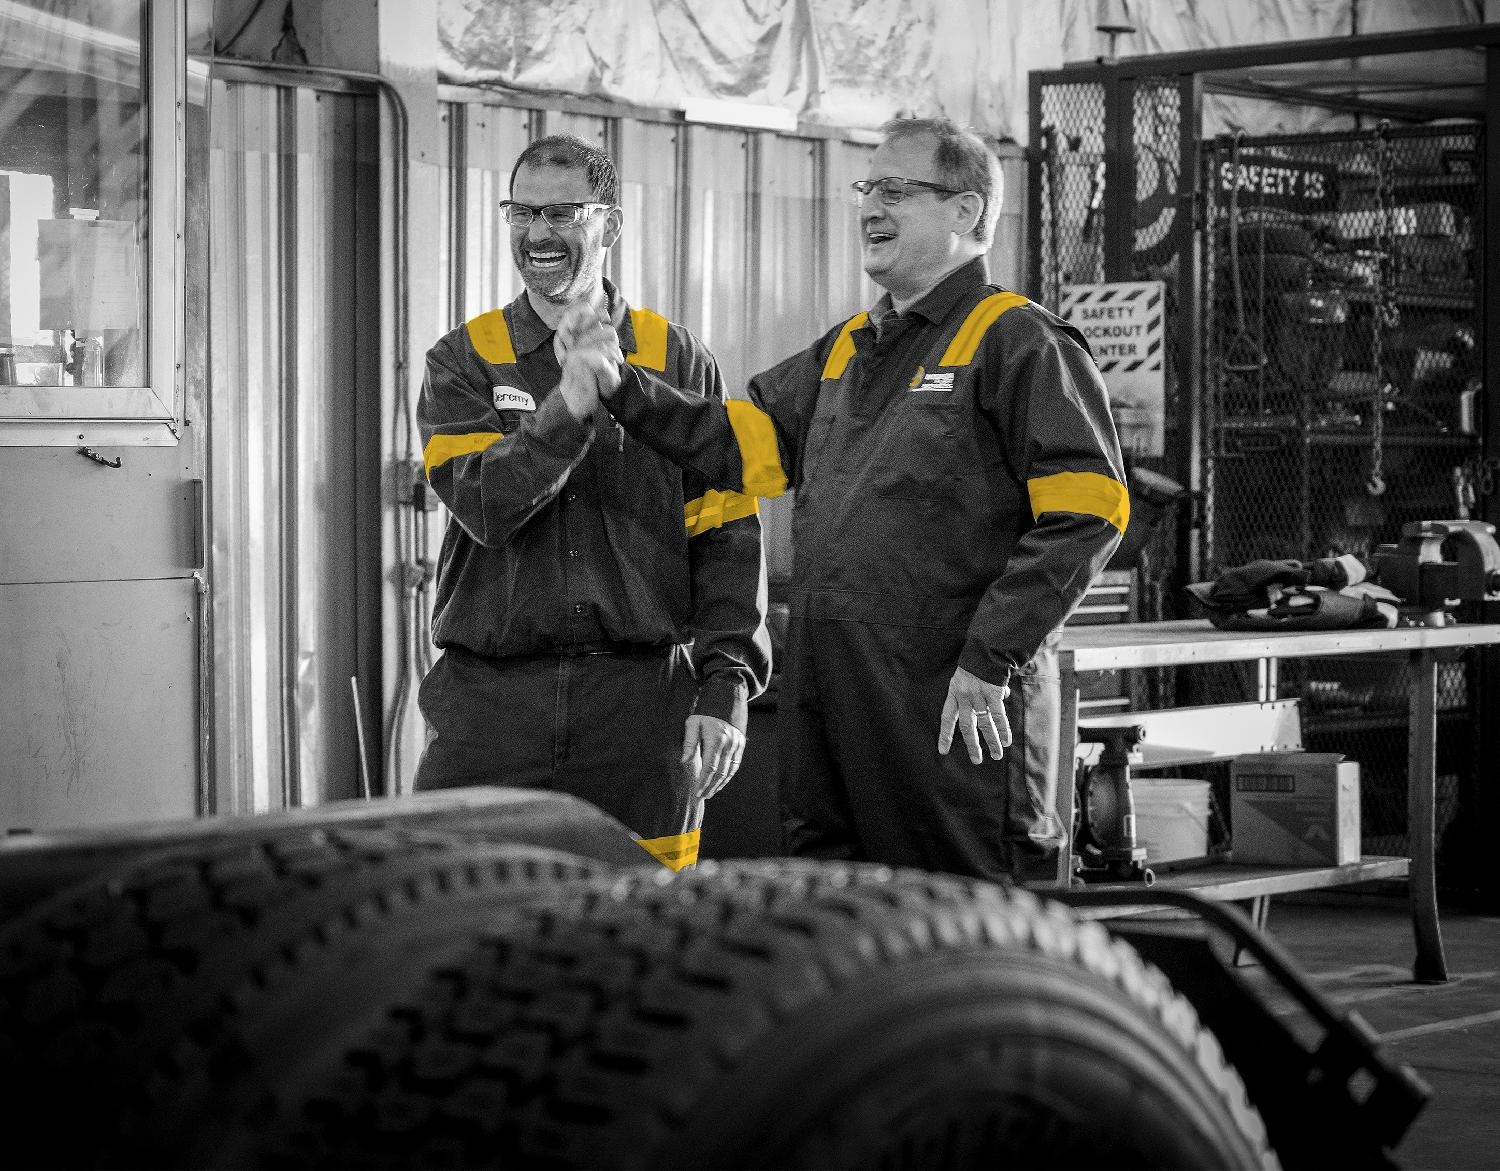 Our service centers are relentlessly focused on quality service and rapid turnaround time.